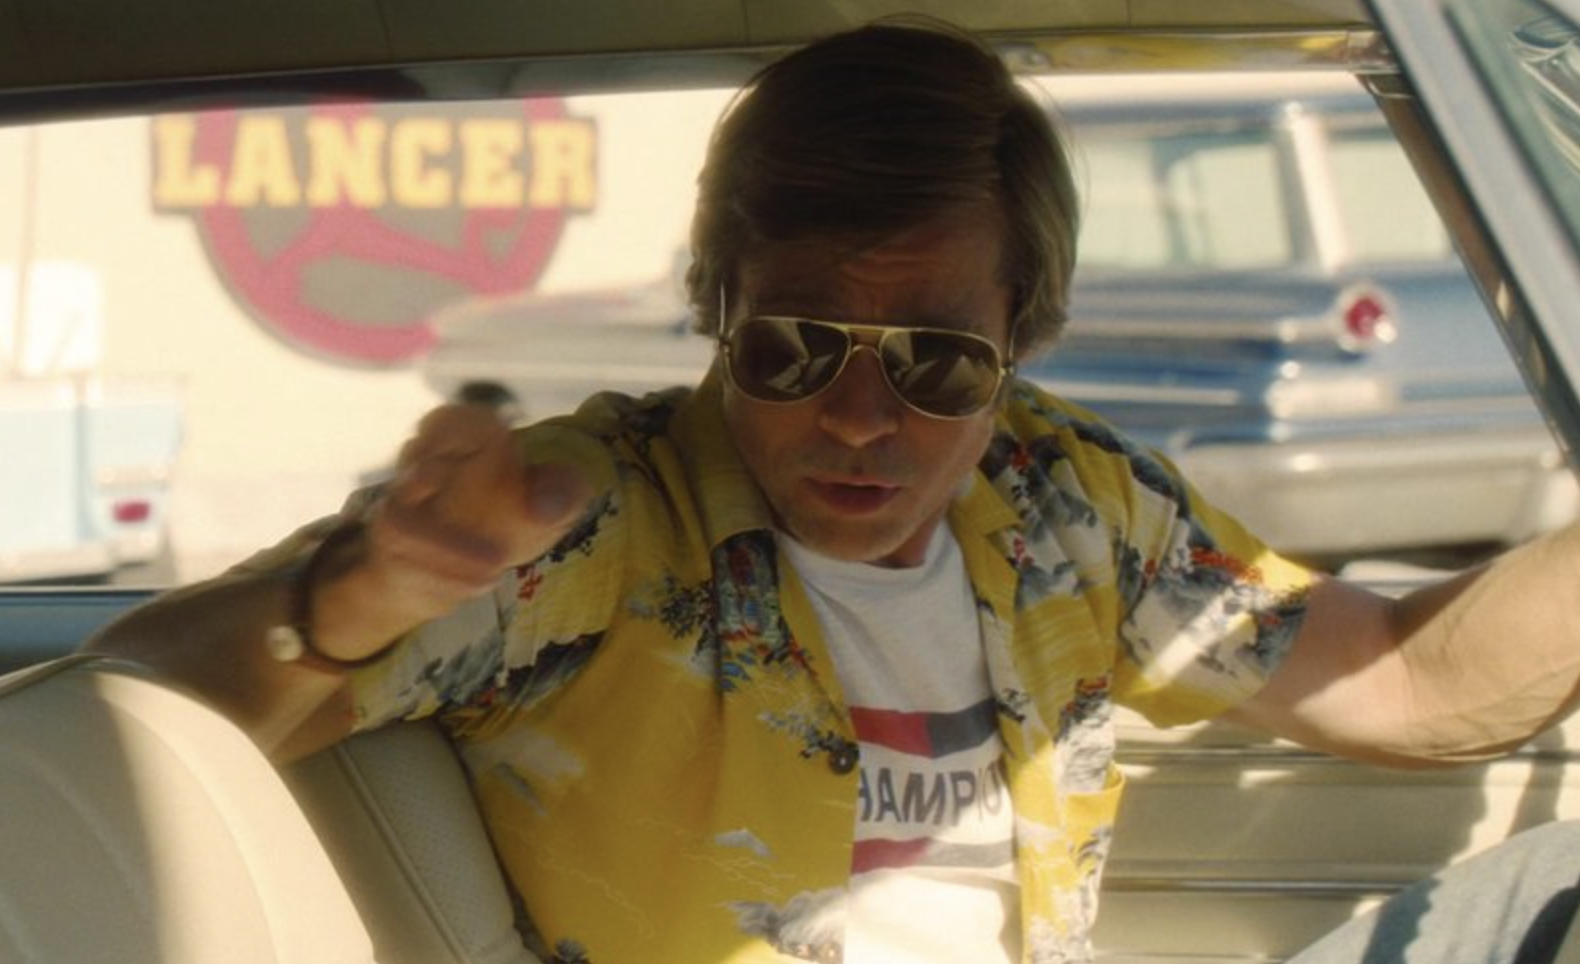 “In ‘Once Upon a Time in Hollywood’ when Cliff is dropping Rick off at set, Brad Pitt yells out ‘HEY! You're Rick f—g Dalton’. Don't you forget it!’ That line was completely improvised and Tarantino apparently loved it.”